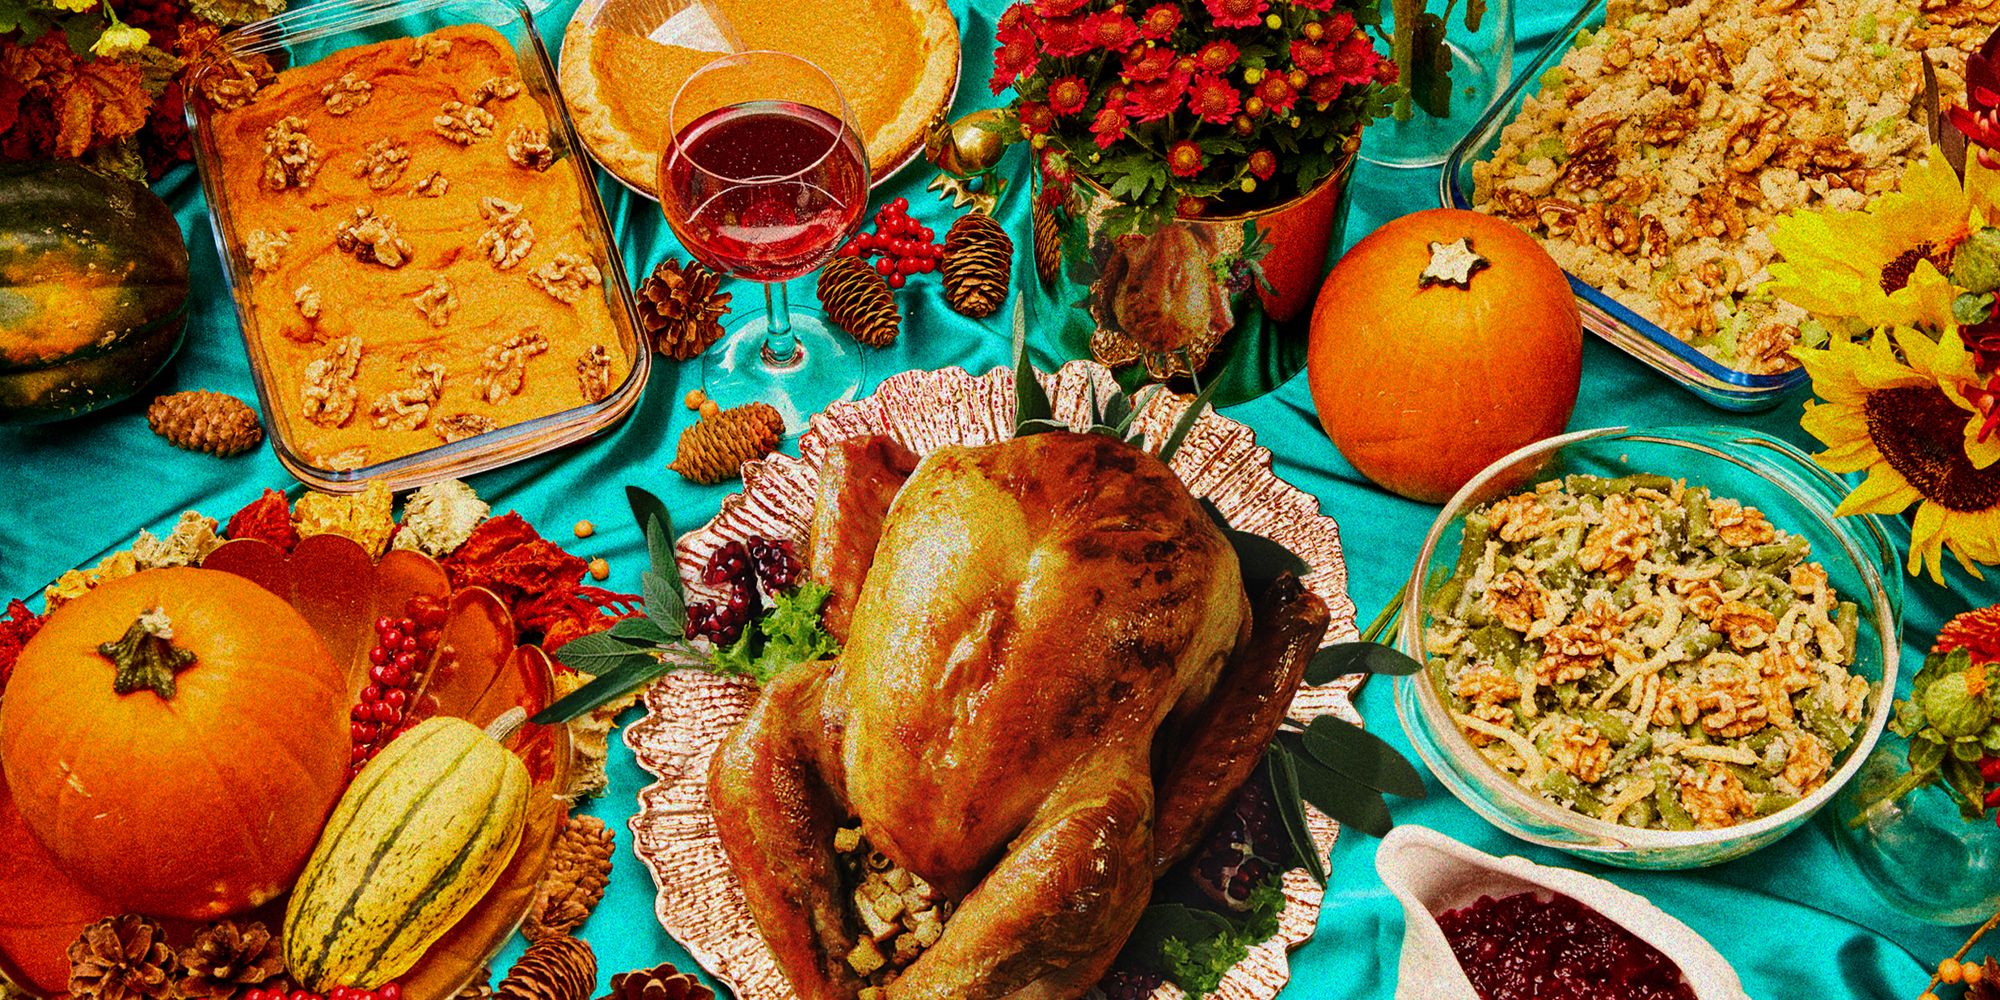 let’s face it turkey is a holiday ritual that may be past its prime